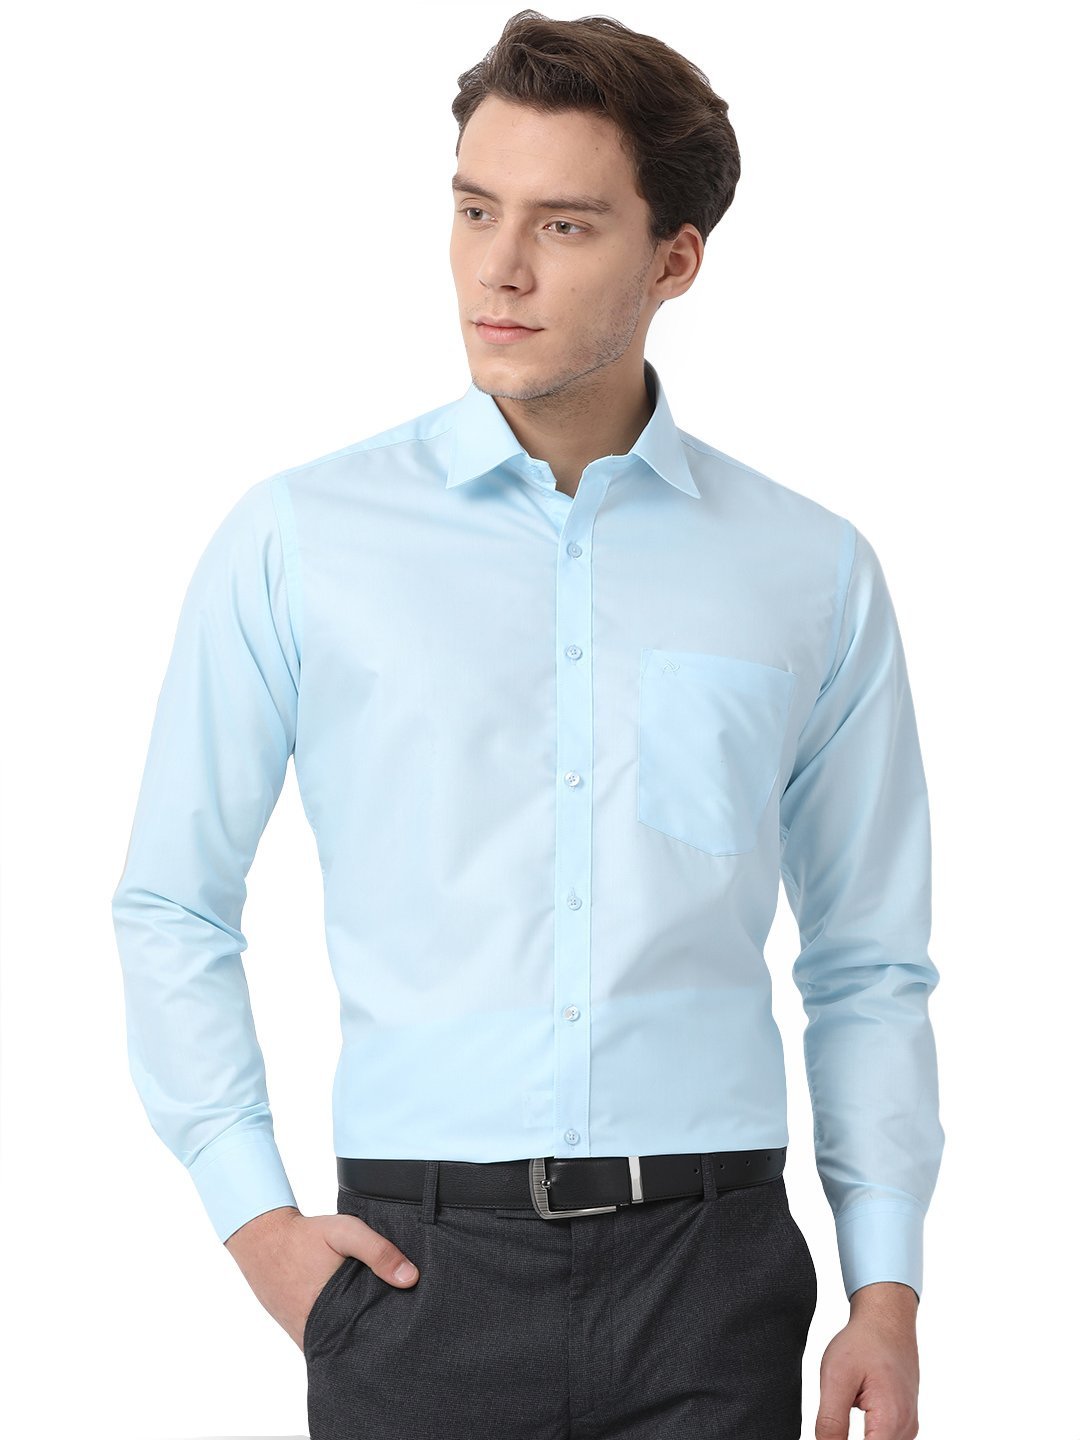 Pan american Sky Blue Color  Shirts For Men'S